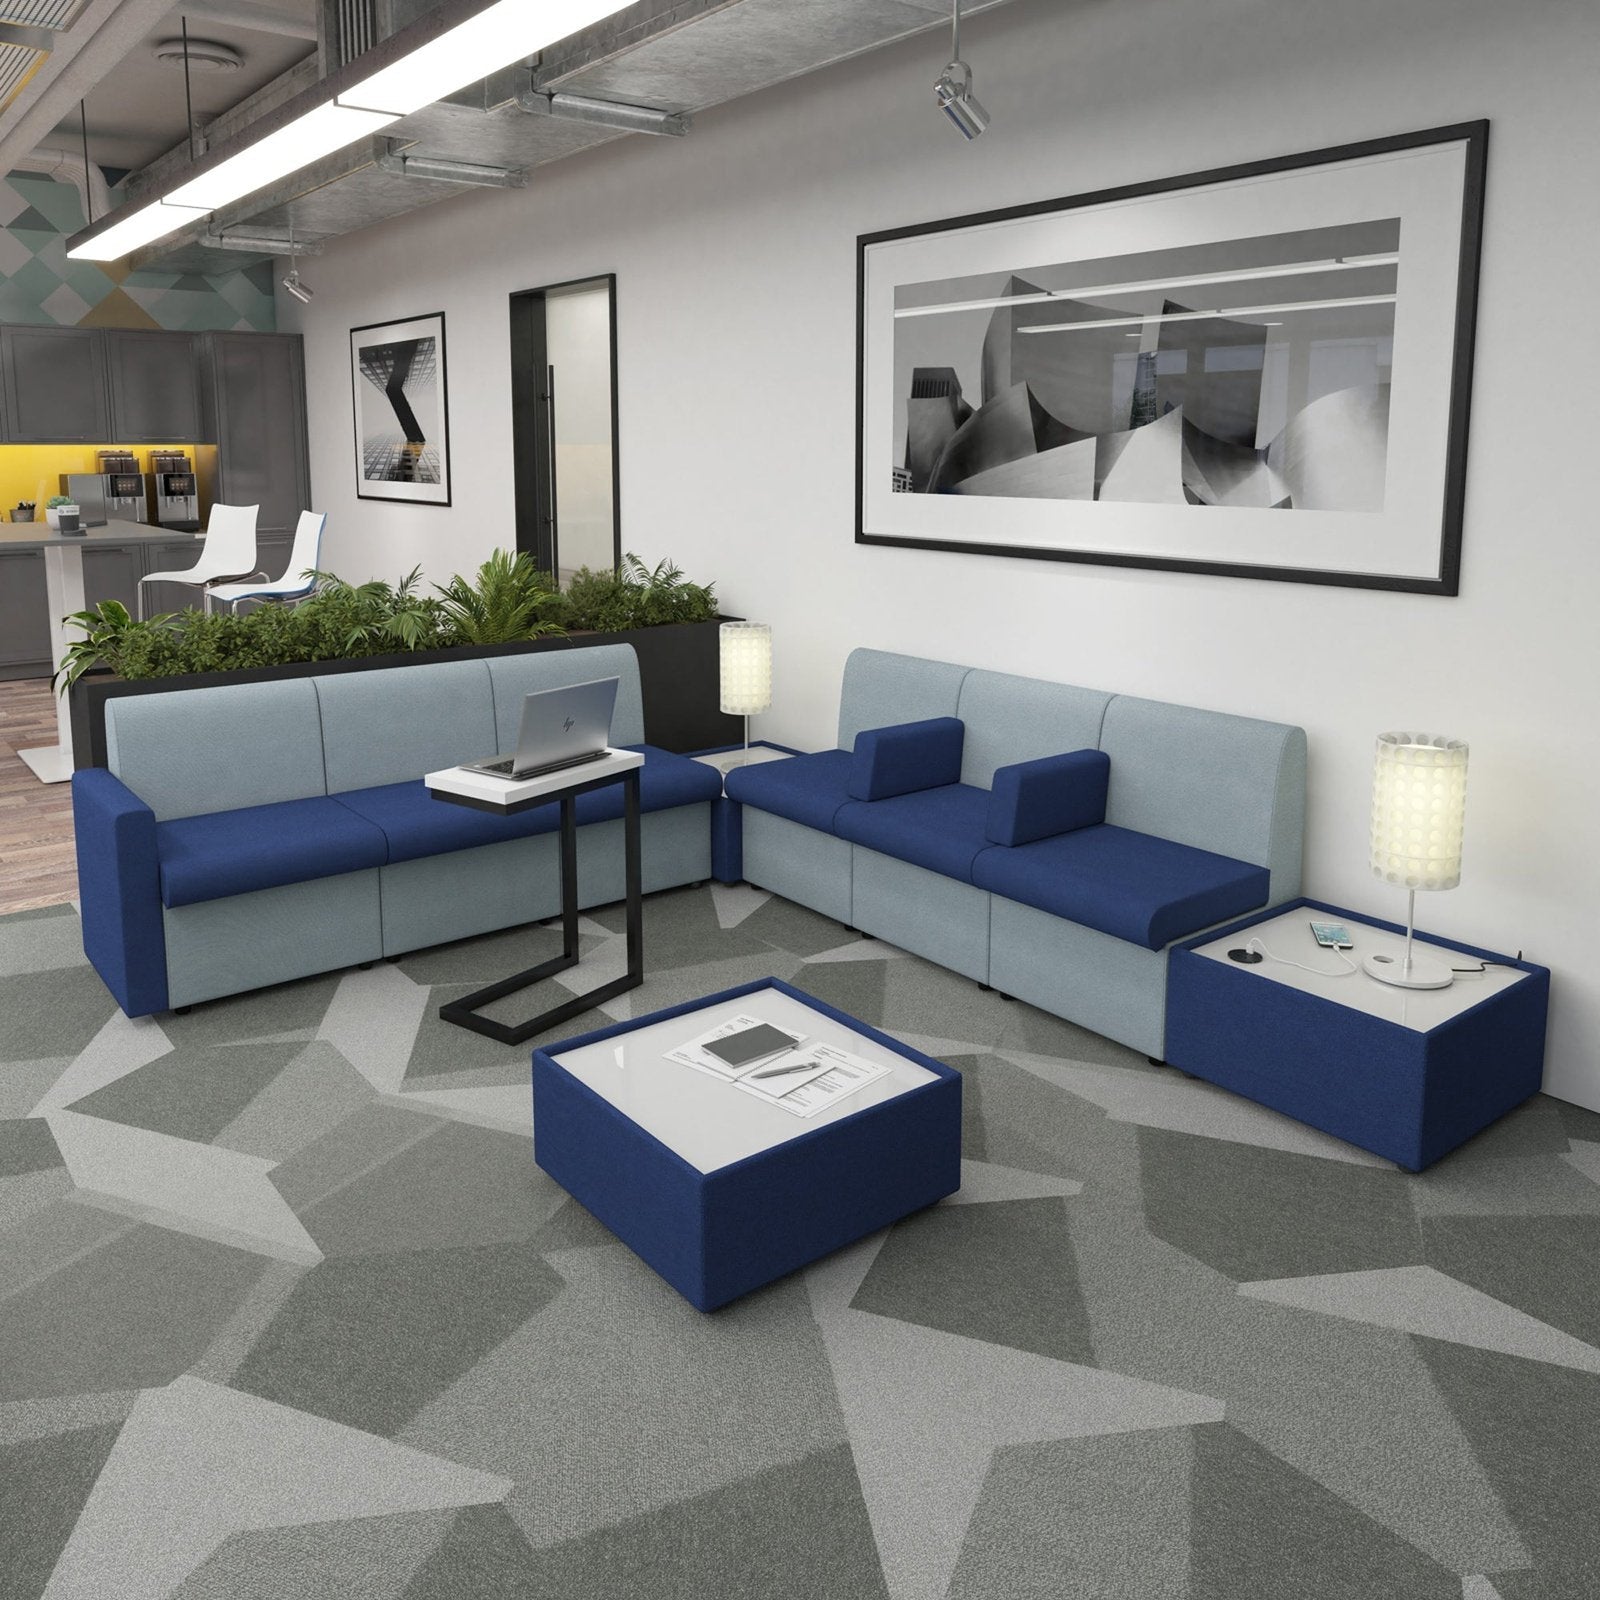 Alto modular reception seating - Office Products Online